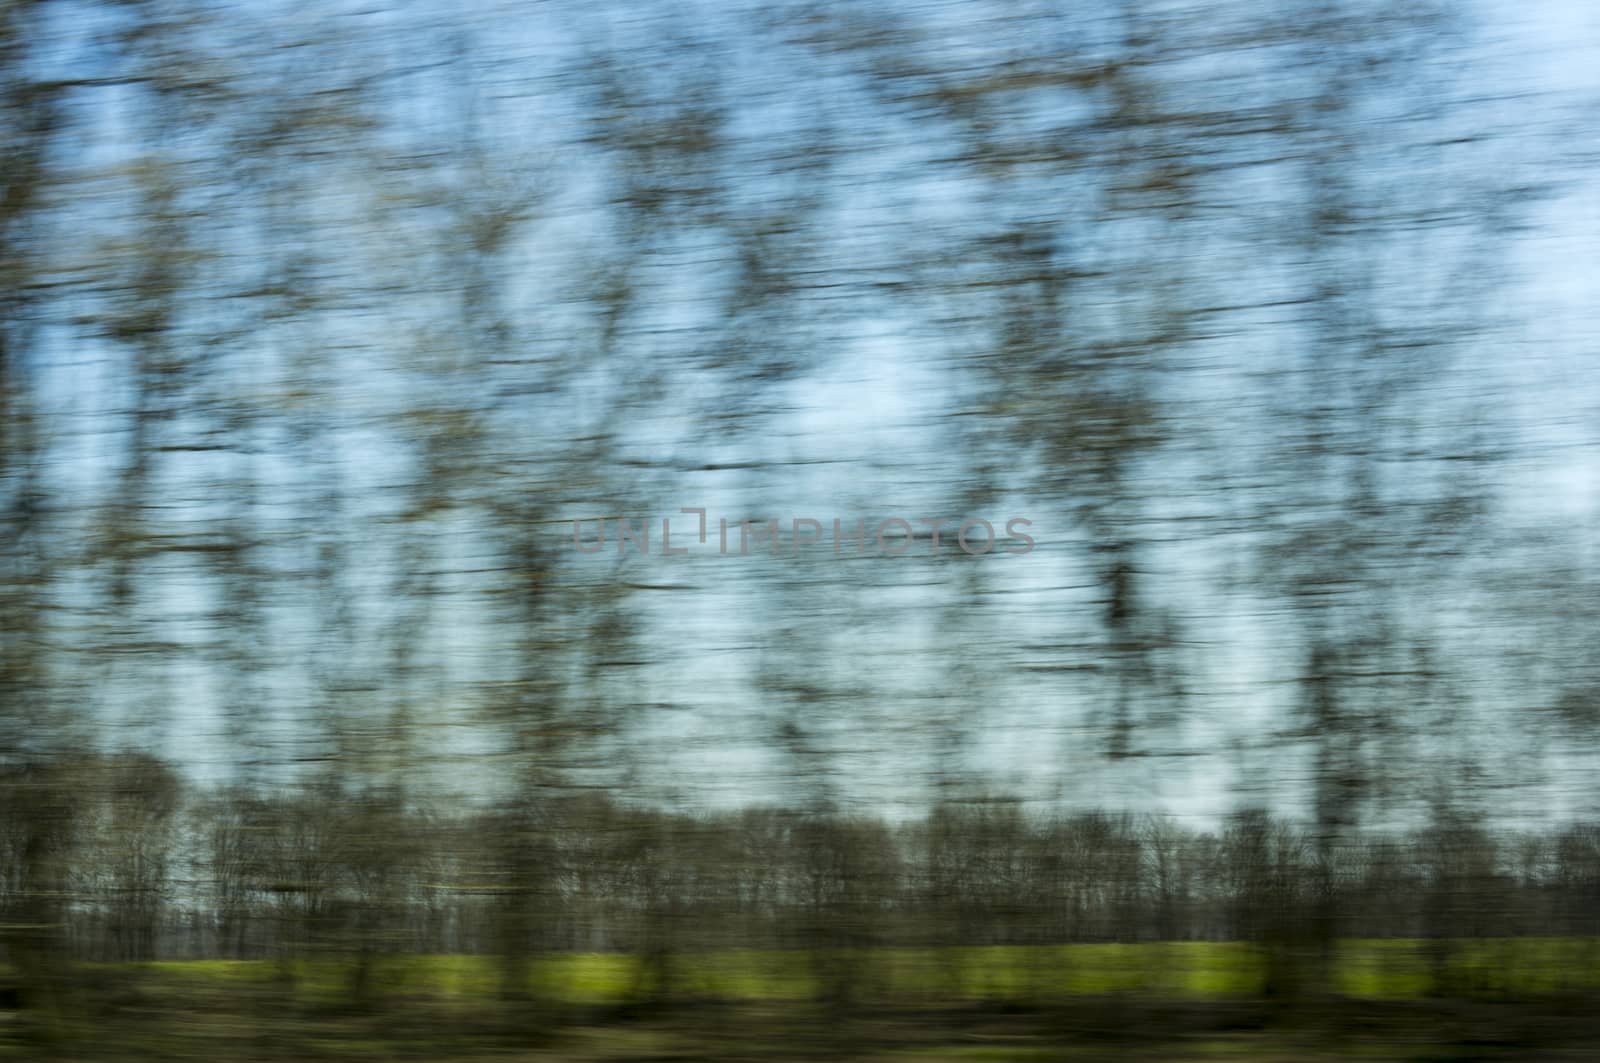 green trees - a blurred window view from train in motion by serhii_lohvyniuk